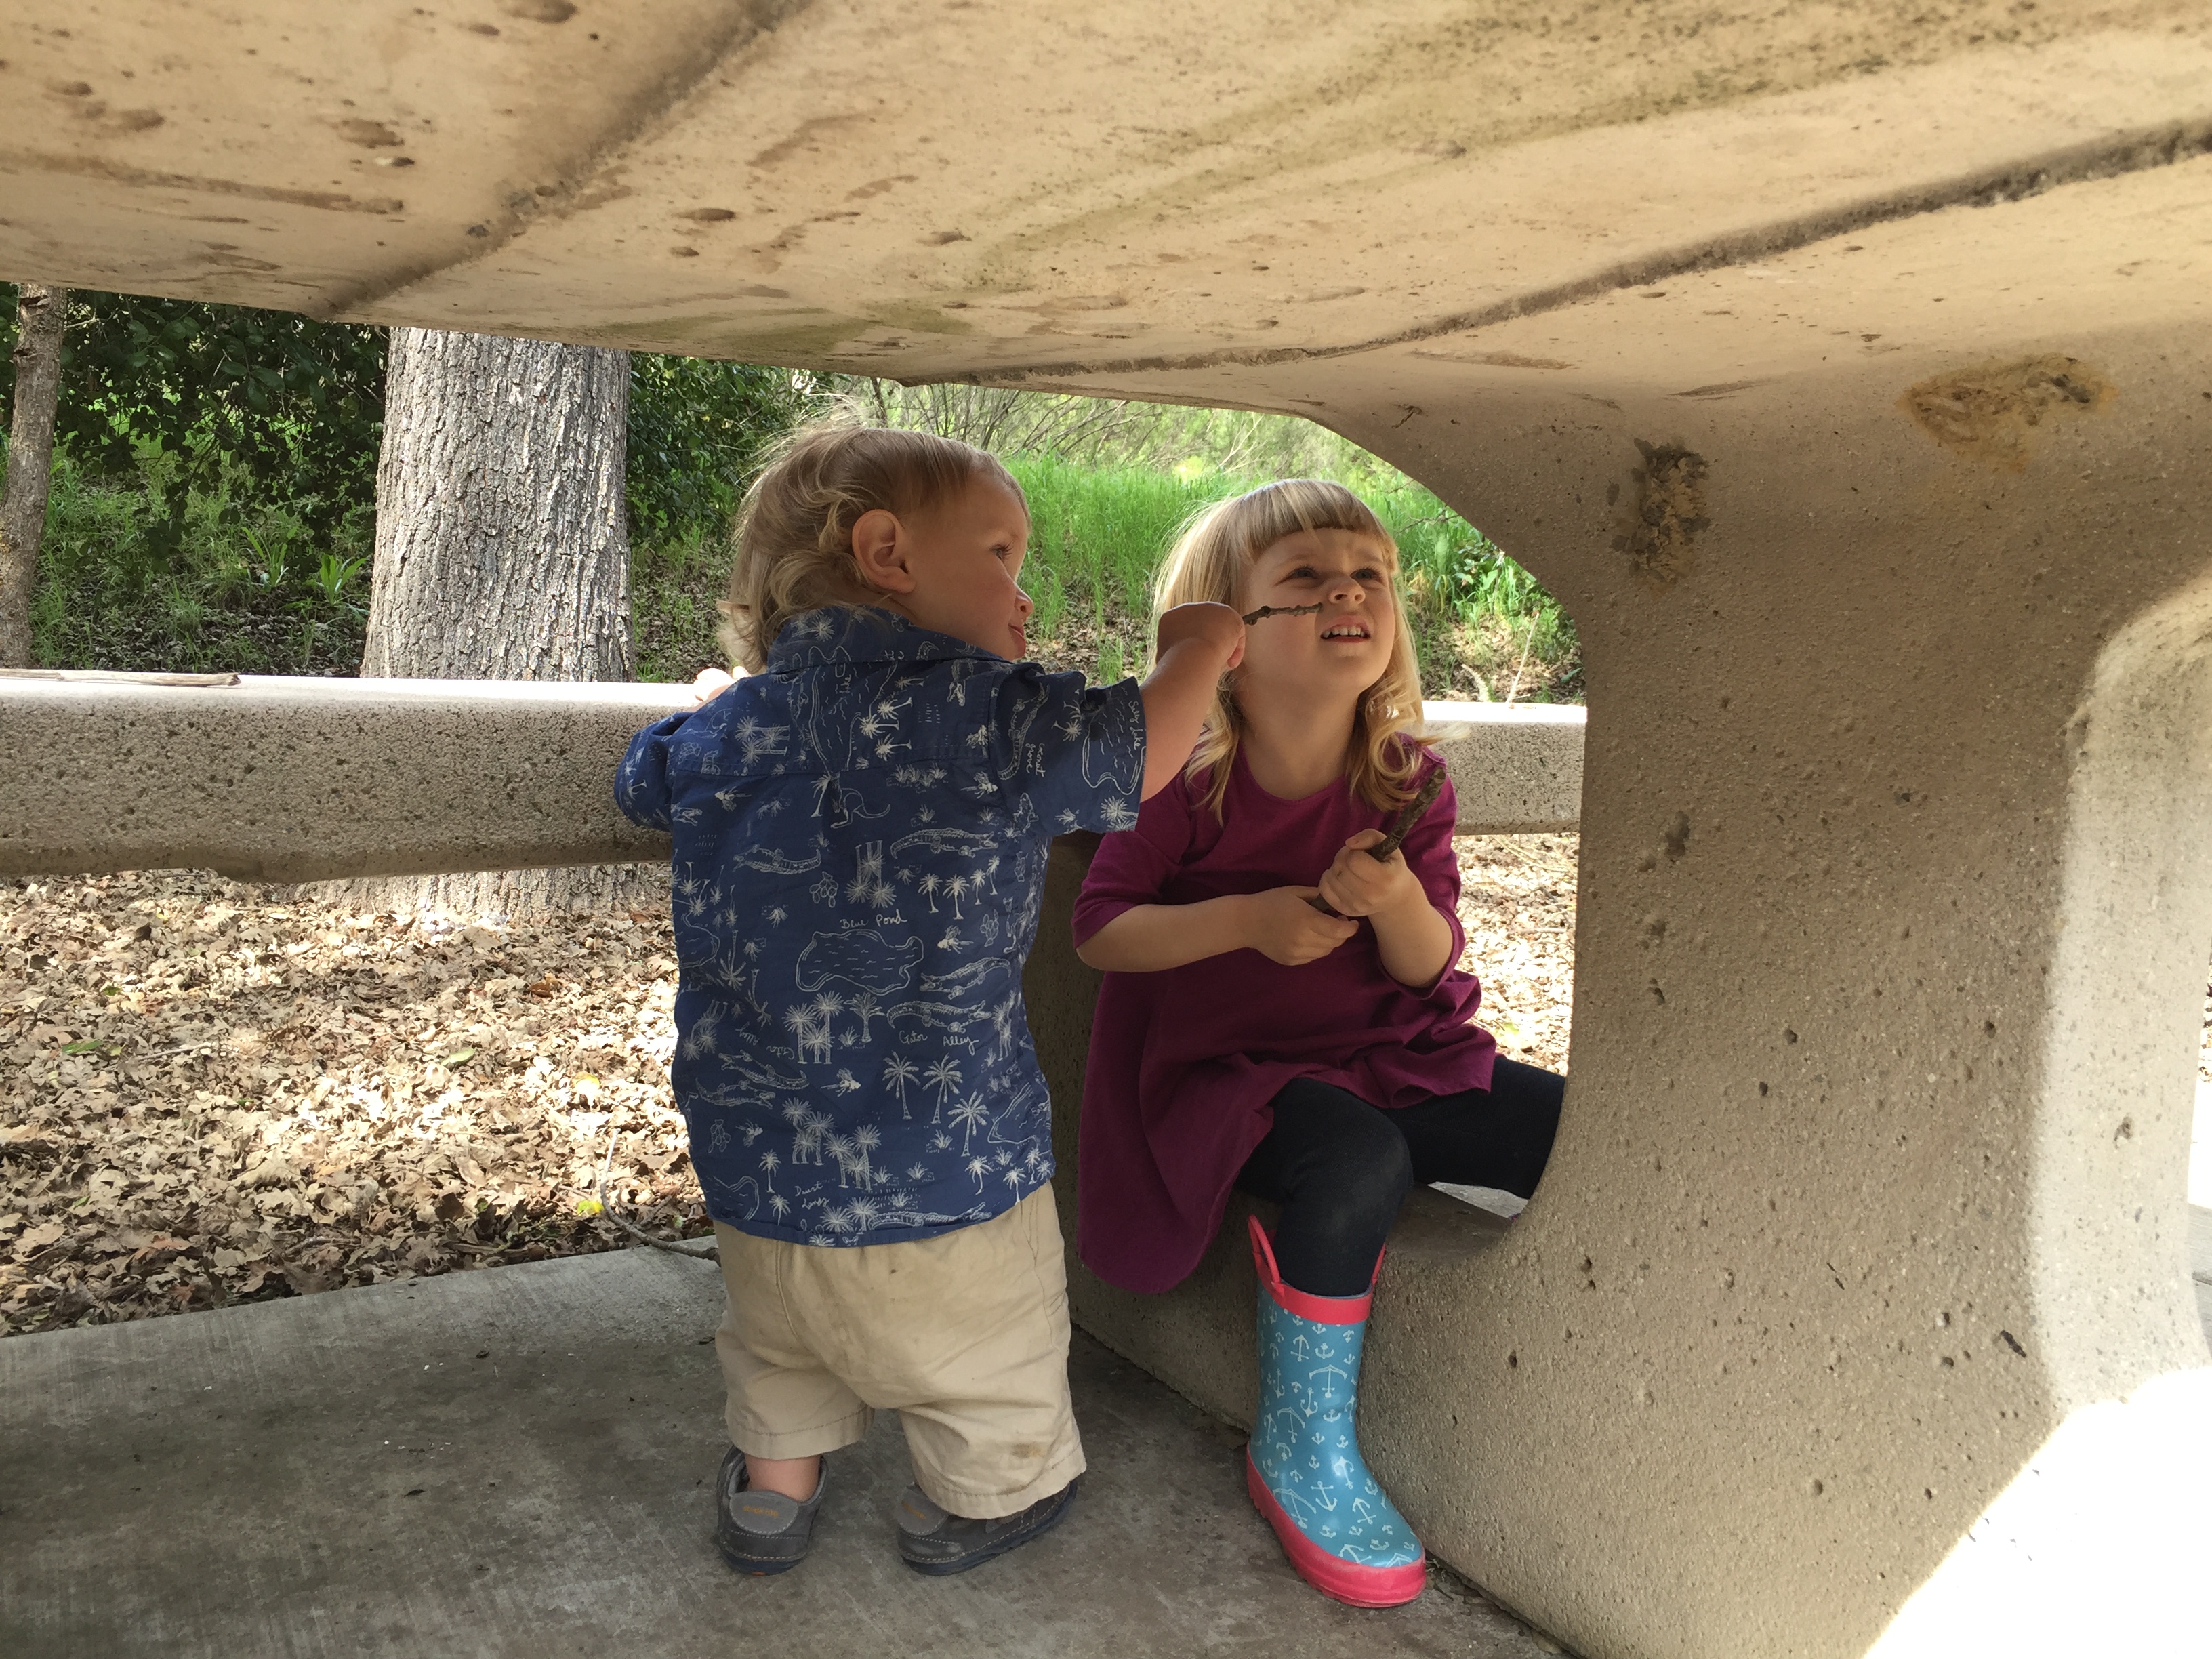 The kids under a concrete picnic table at Apple Valley Park in Atascadero California from the blog Two In Tow & On The Go.